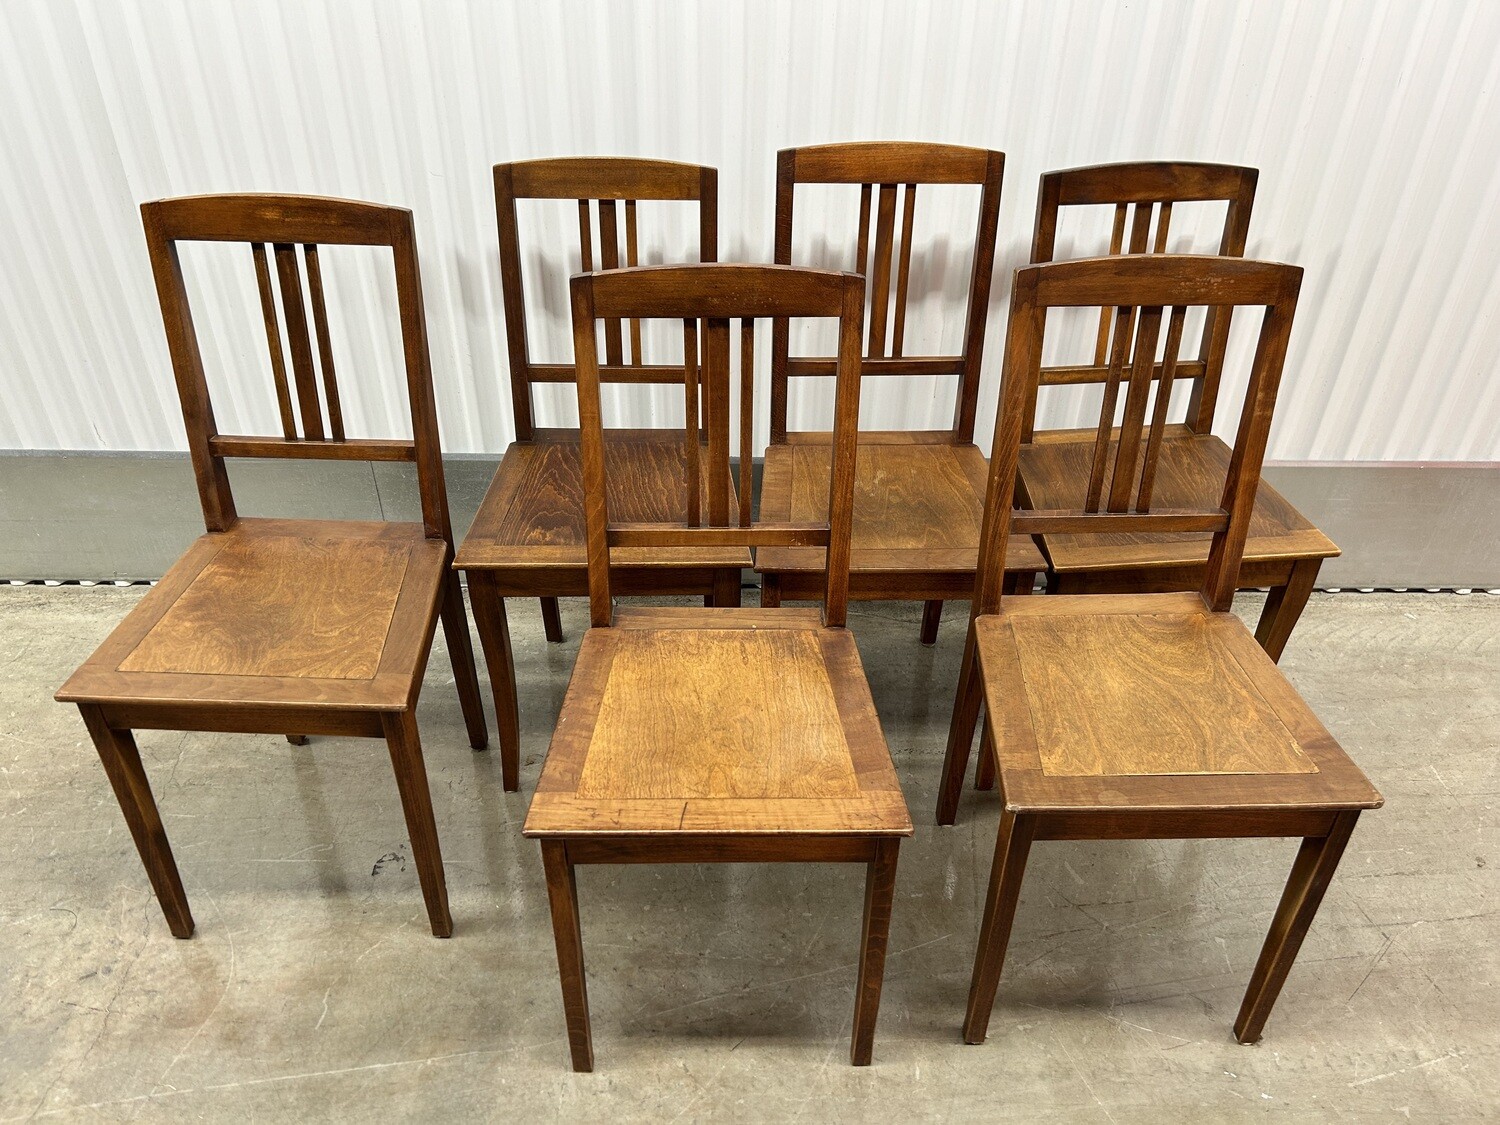 Set of 6 Dining Chairs, made in Estonia #2124 ** 1 mo. to sell, full price